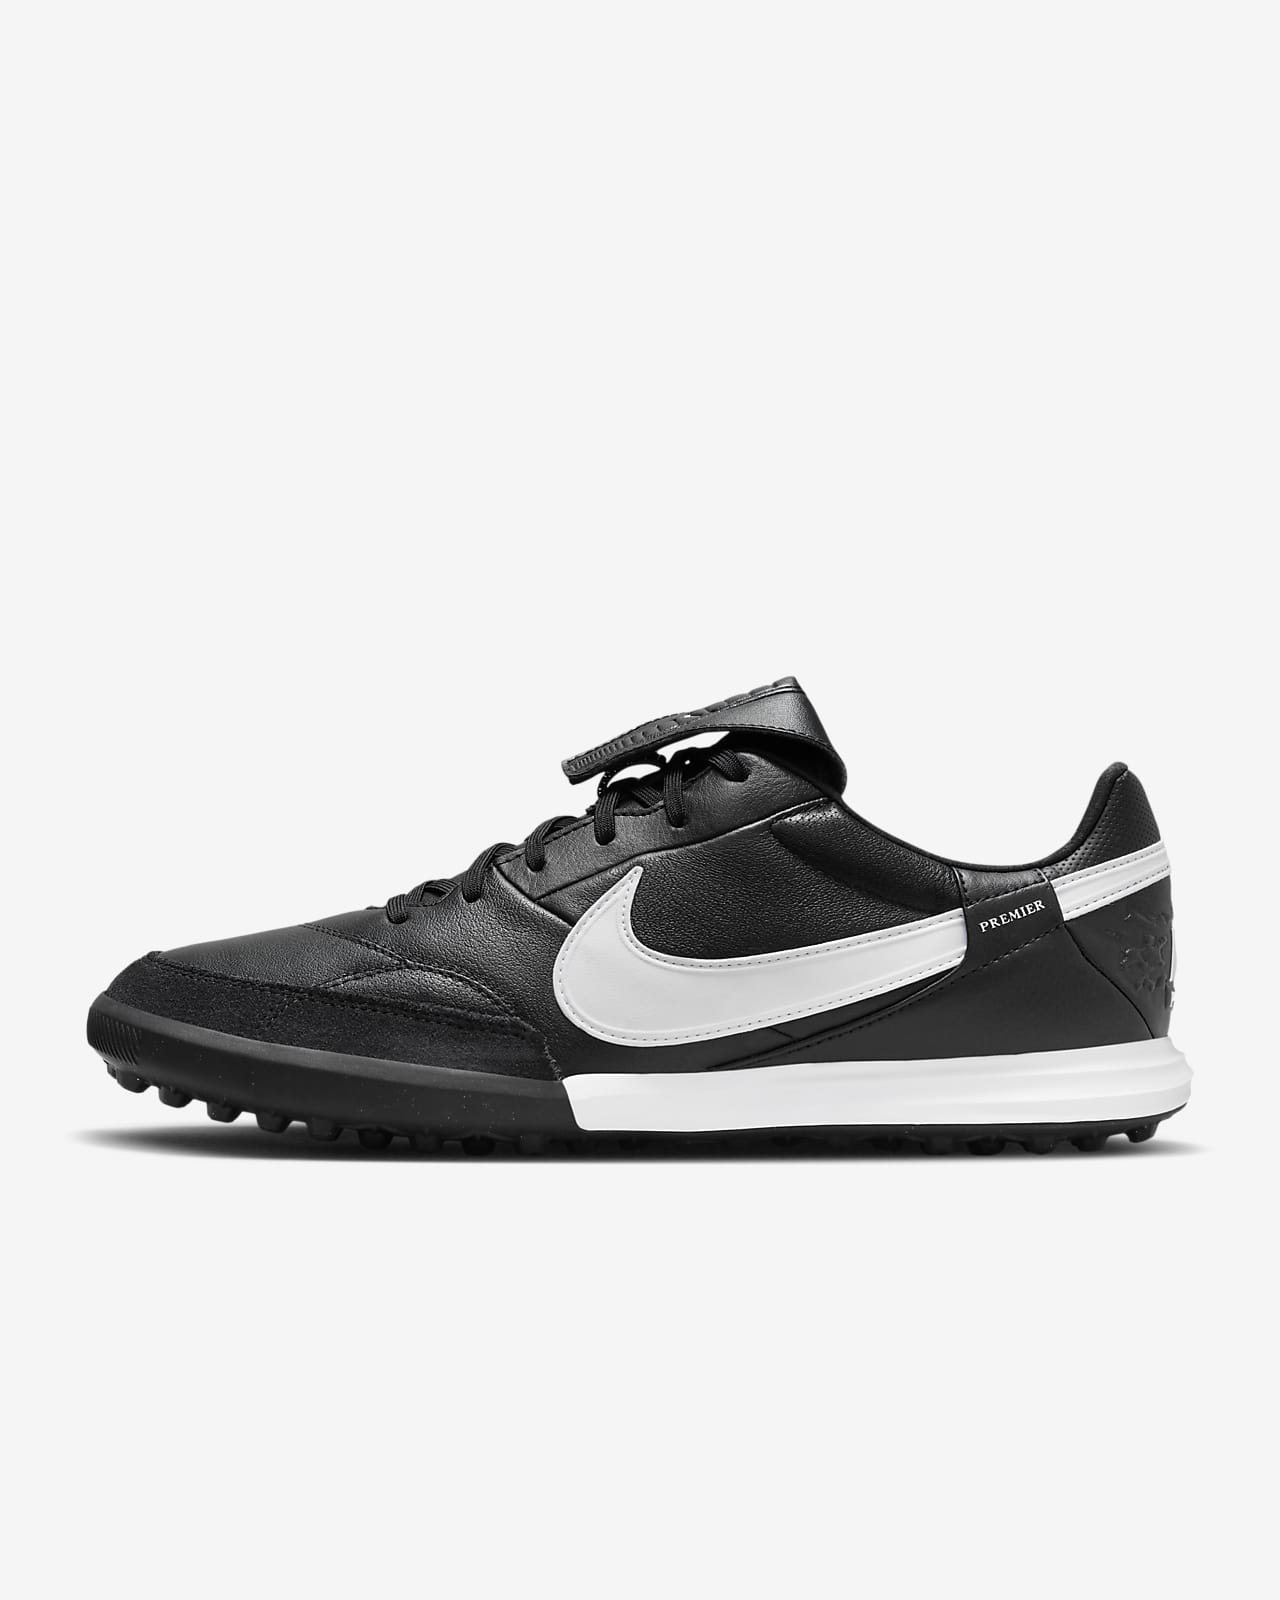 Nike Premier 3 TF Low-Top Football Shoes